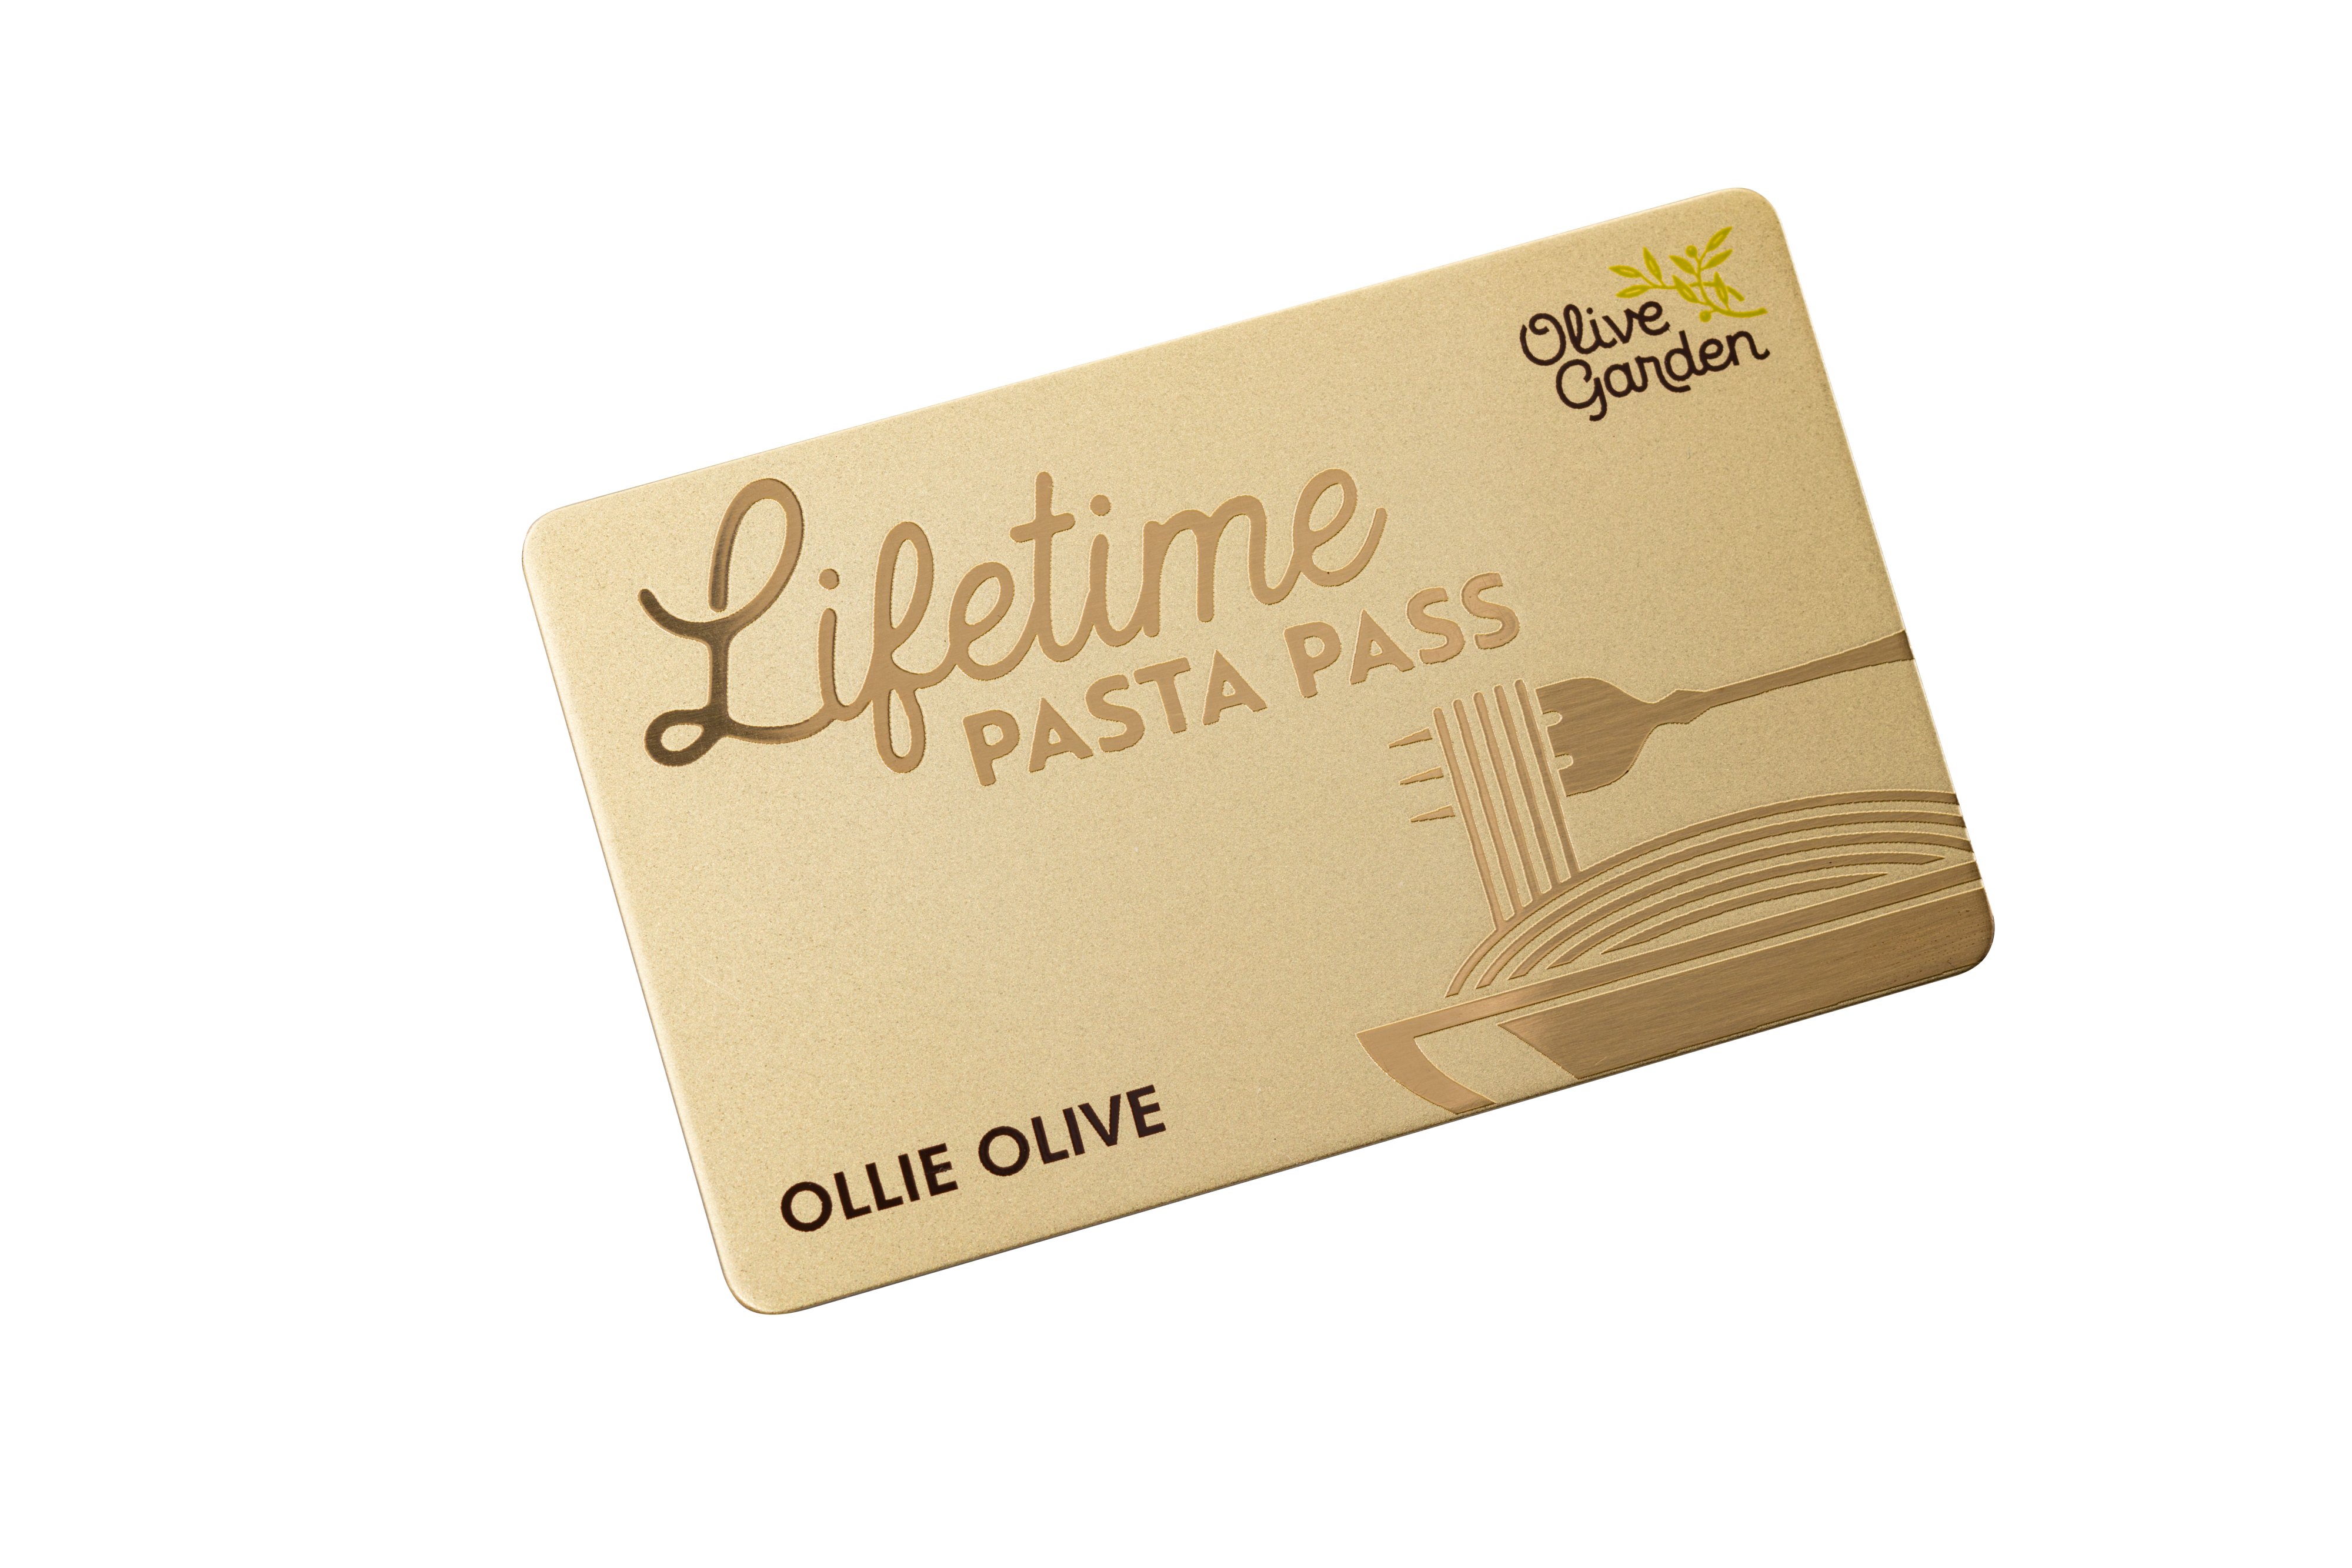 Olive Gardens New Lifetime Pasta Pass Will Give You Pasta Until You Die 02 ?w=4000&quality=86&strip=all